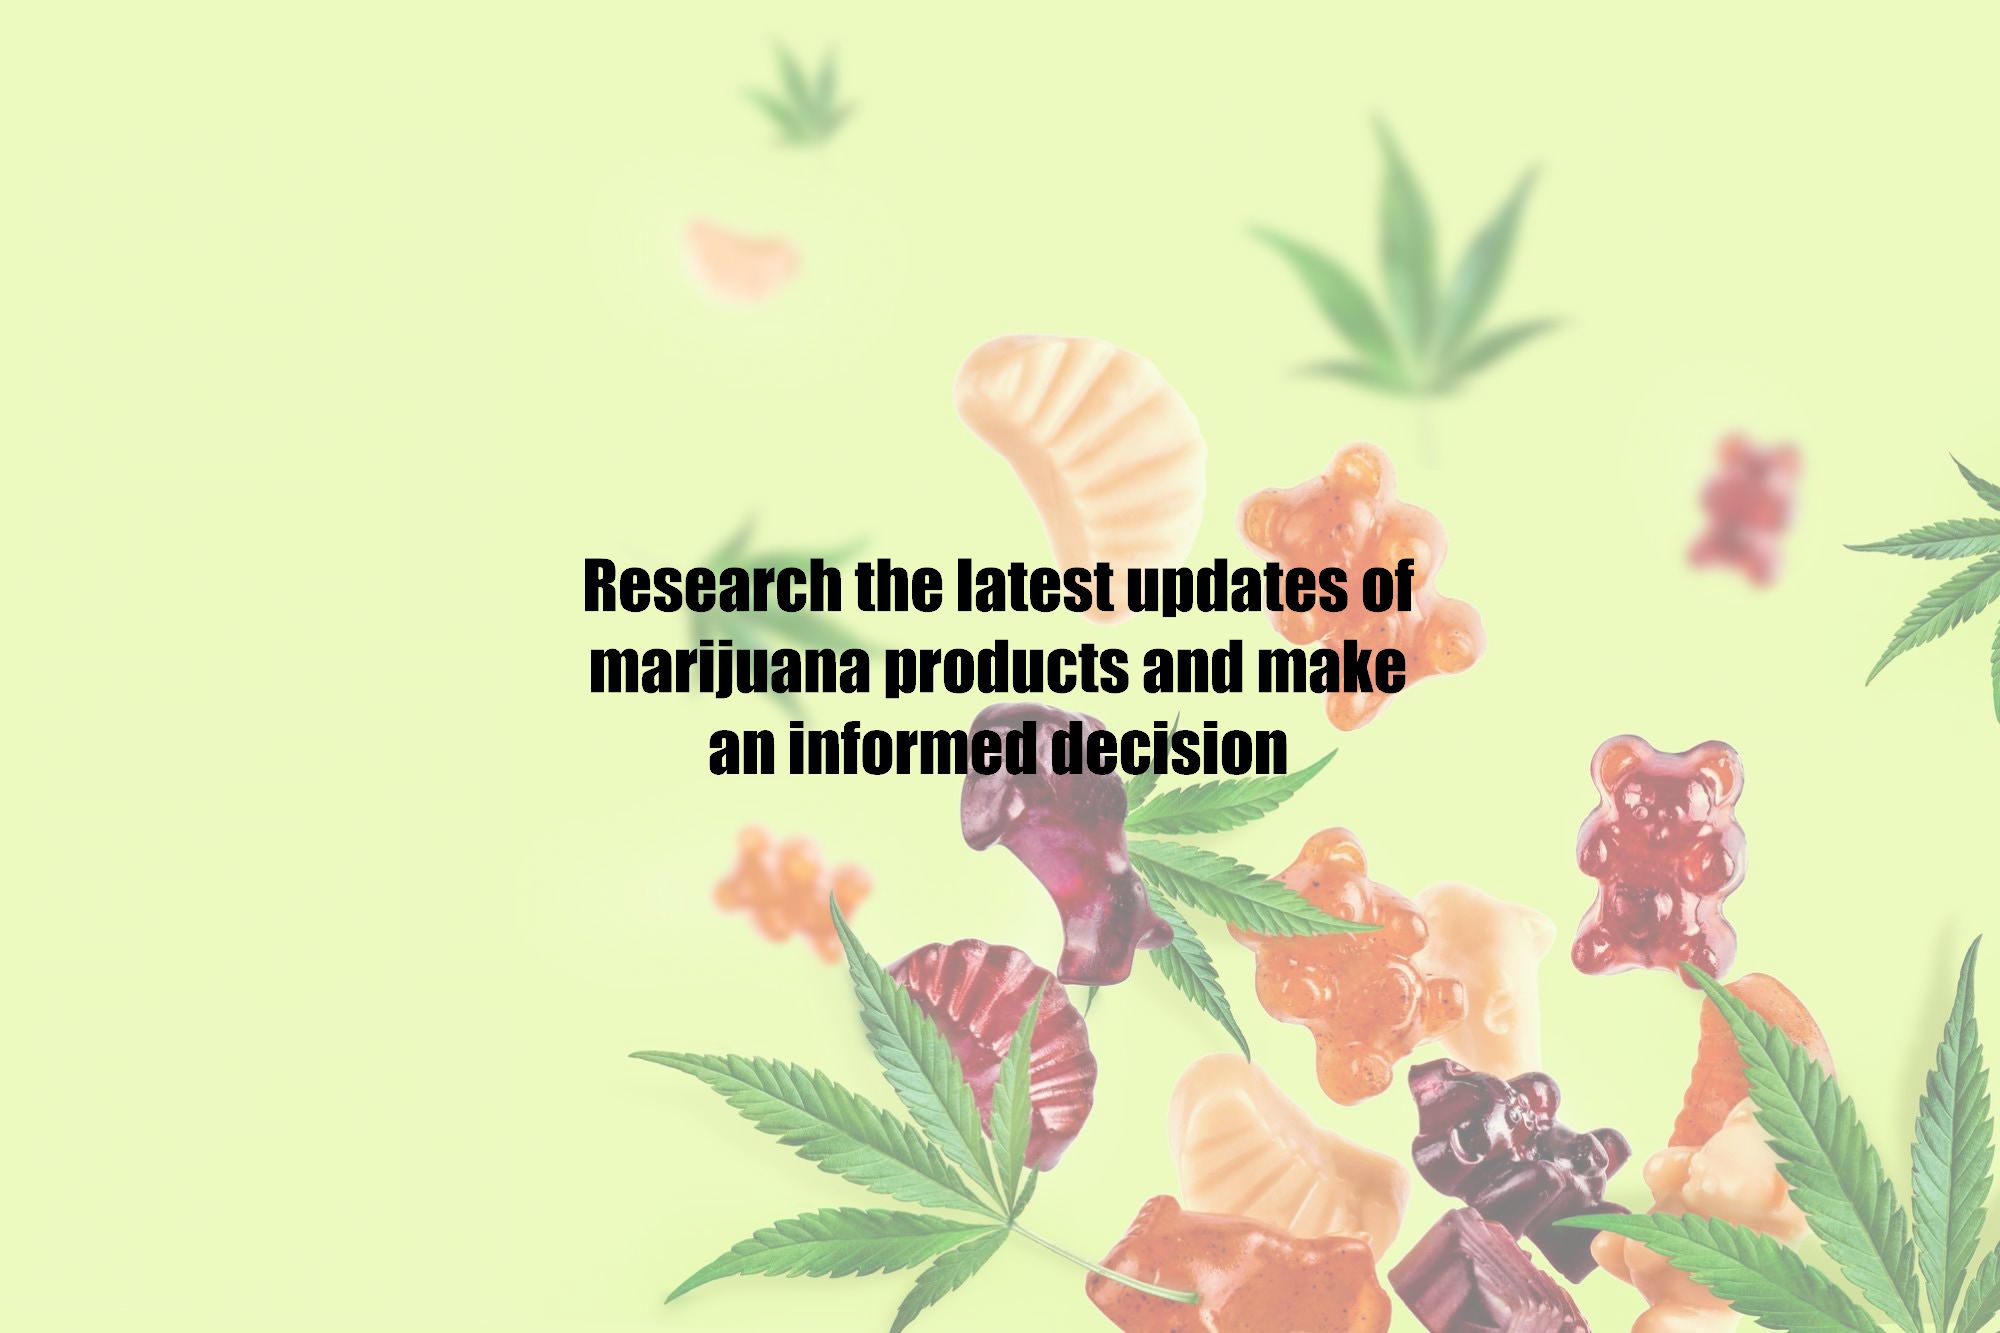 Research the latest updates of marijuana products and make an informed decision